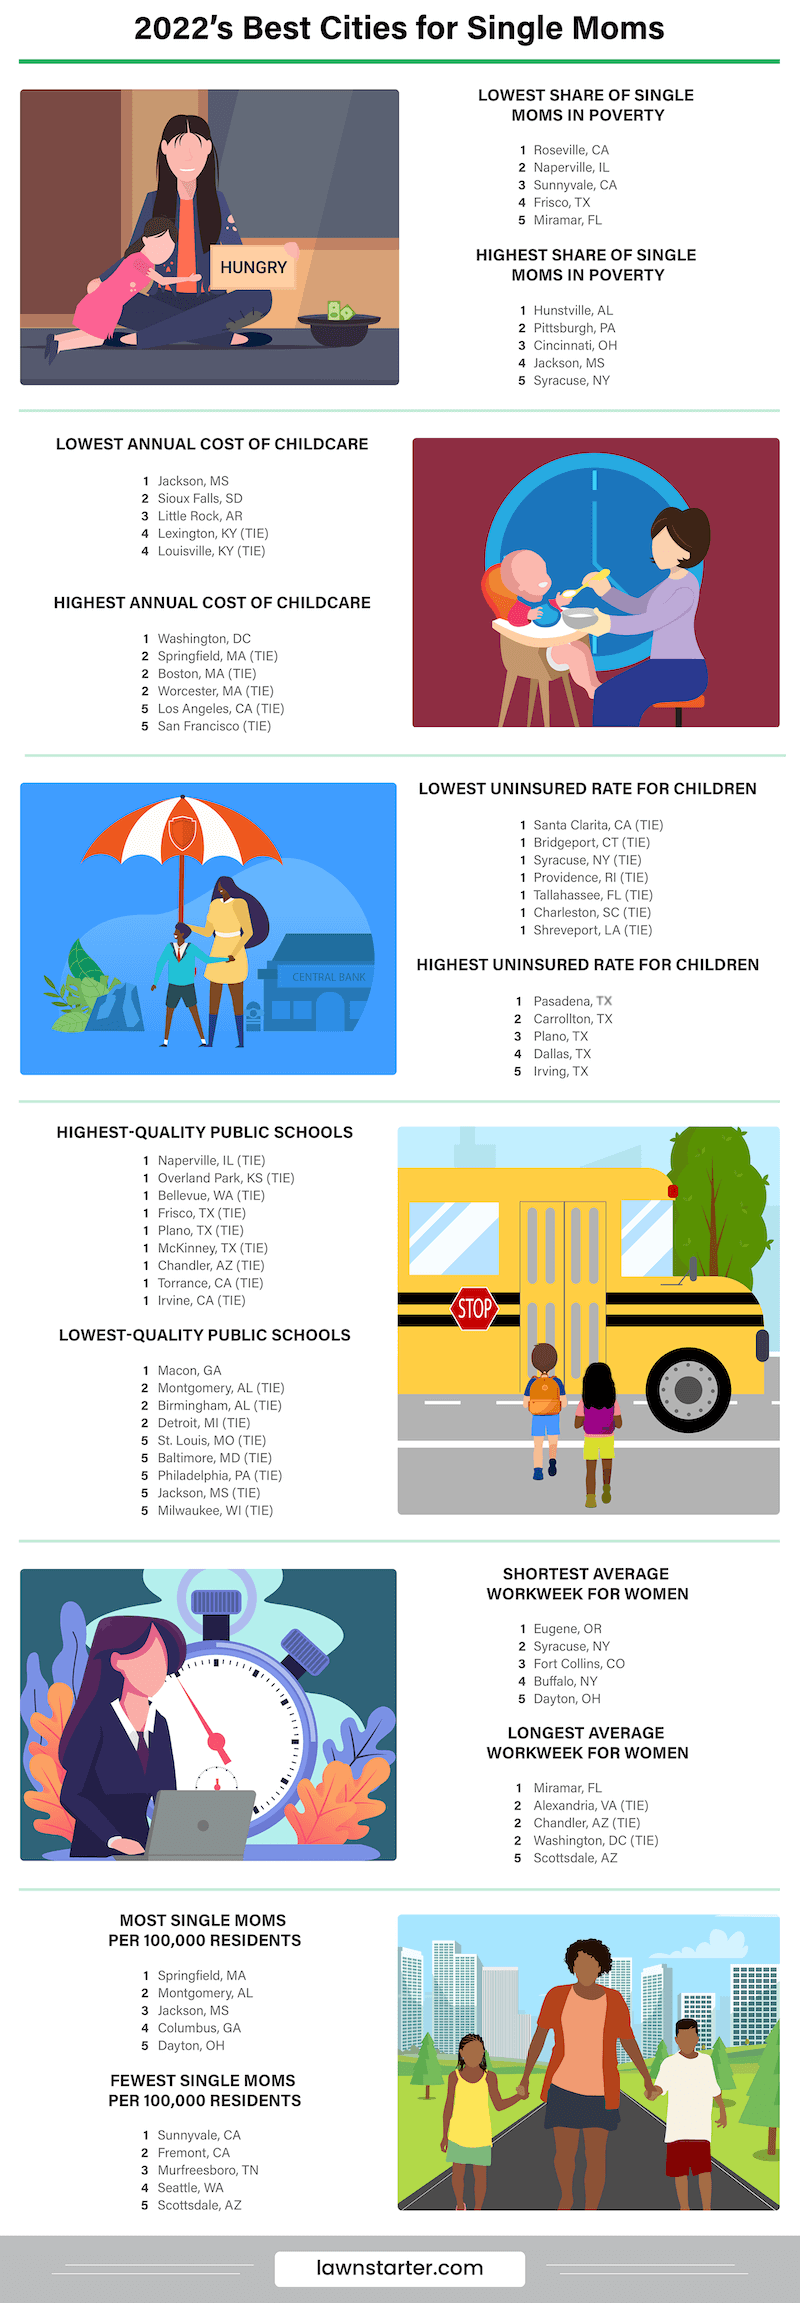 Infographic showing the Best Cities for Single Moms, a ranking based on 36 key metrics, such as cost of living, cost of child care, food insecurity rate, public school quality, and more